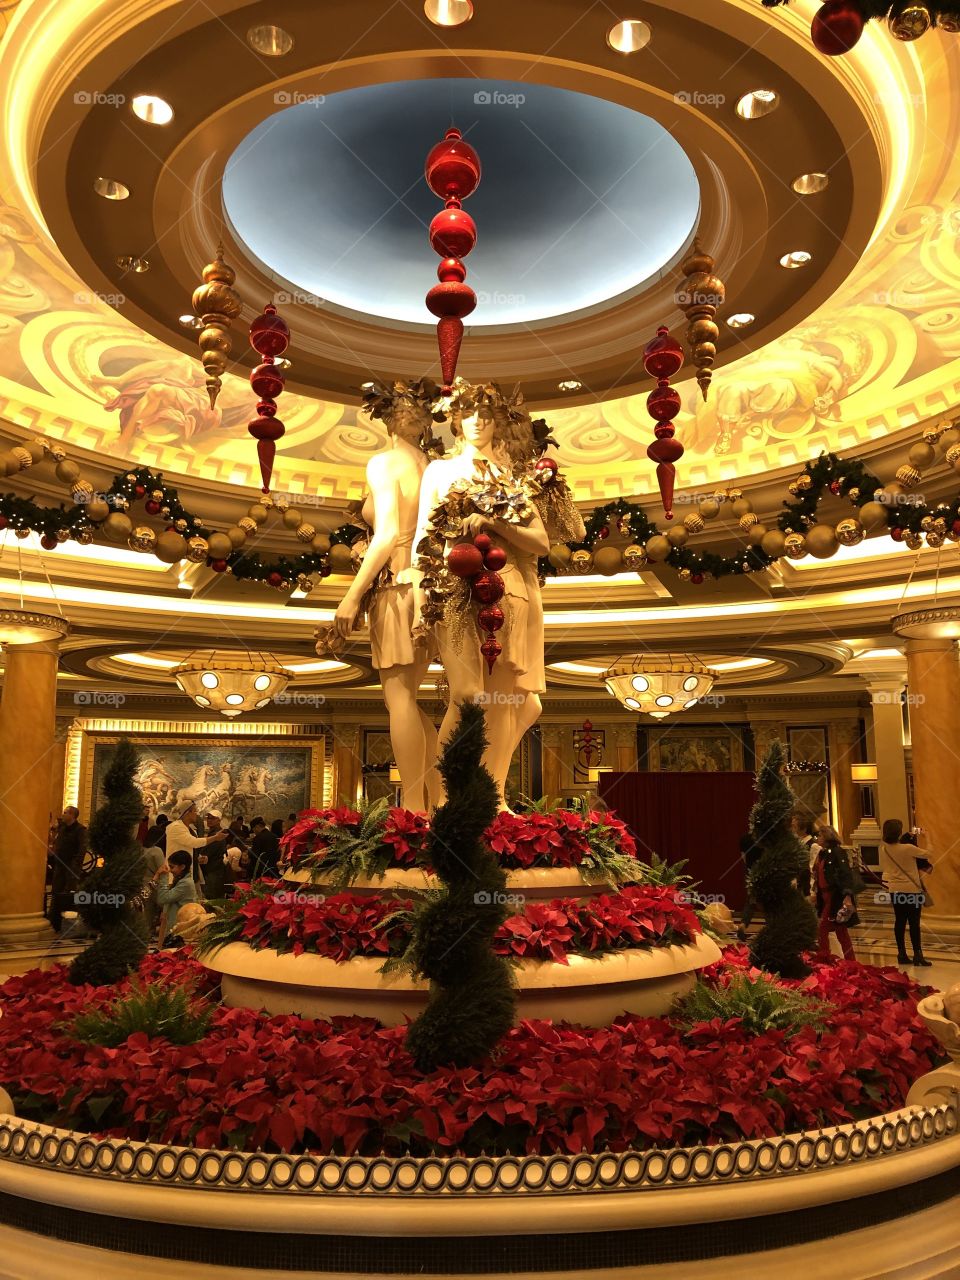 Wonderful holiday / Christmas decorations at the lobby of Caesar’s Palace in Las Vegas